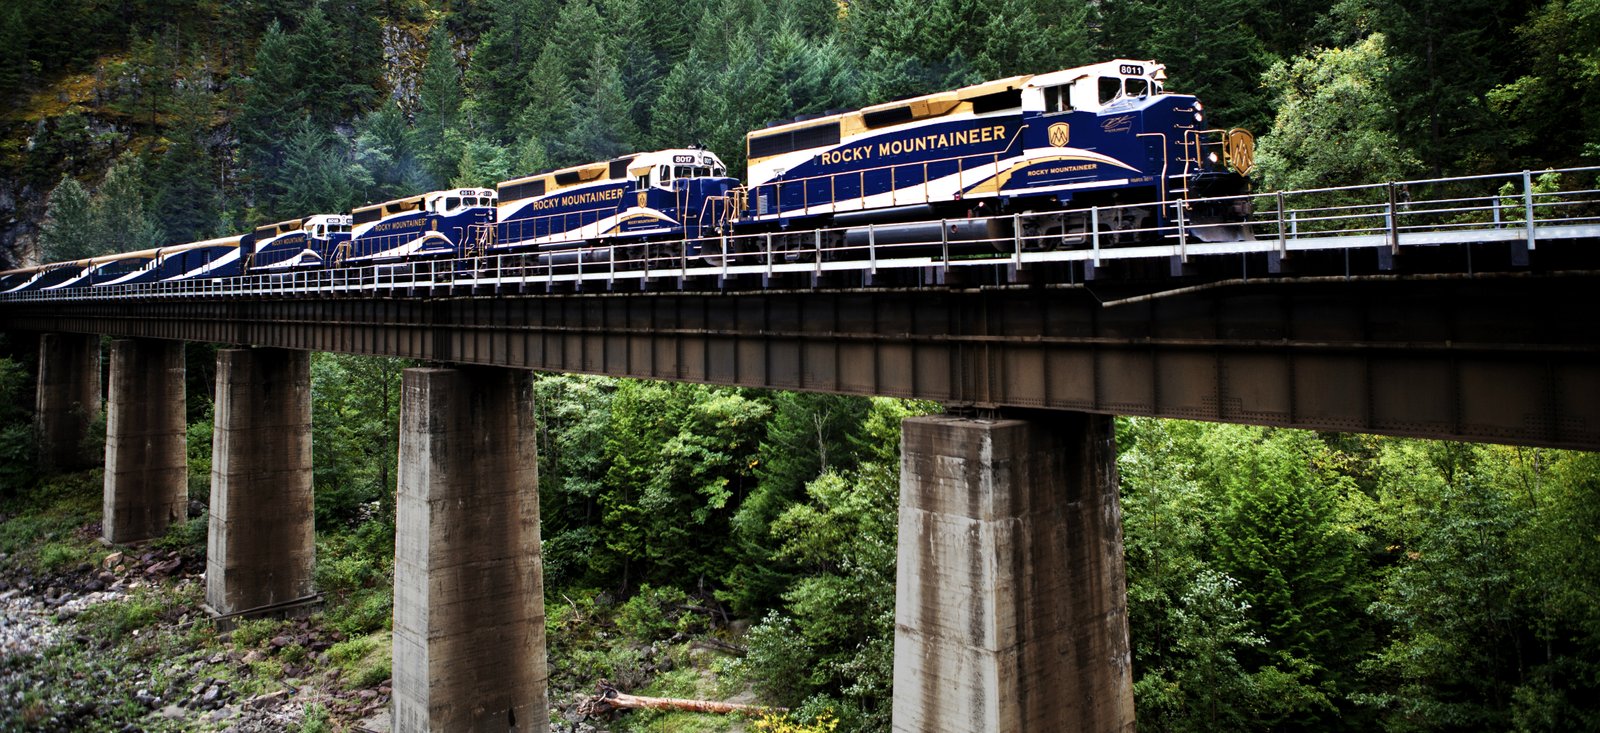 The Rocky Mountaineer: A Train to the Sublime